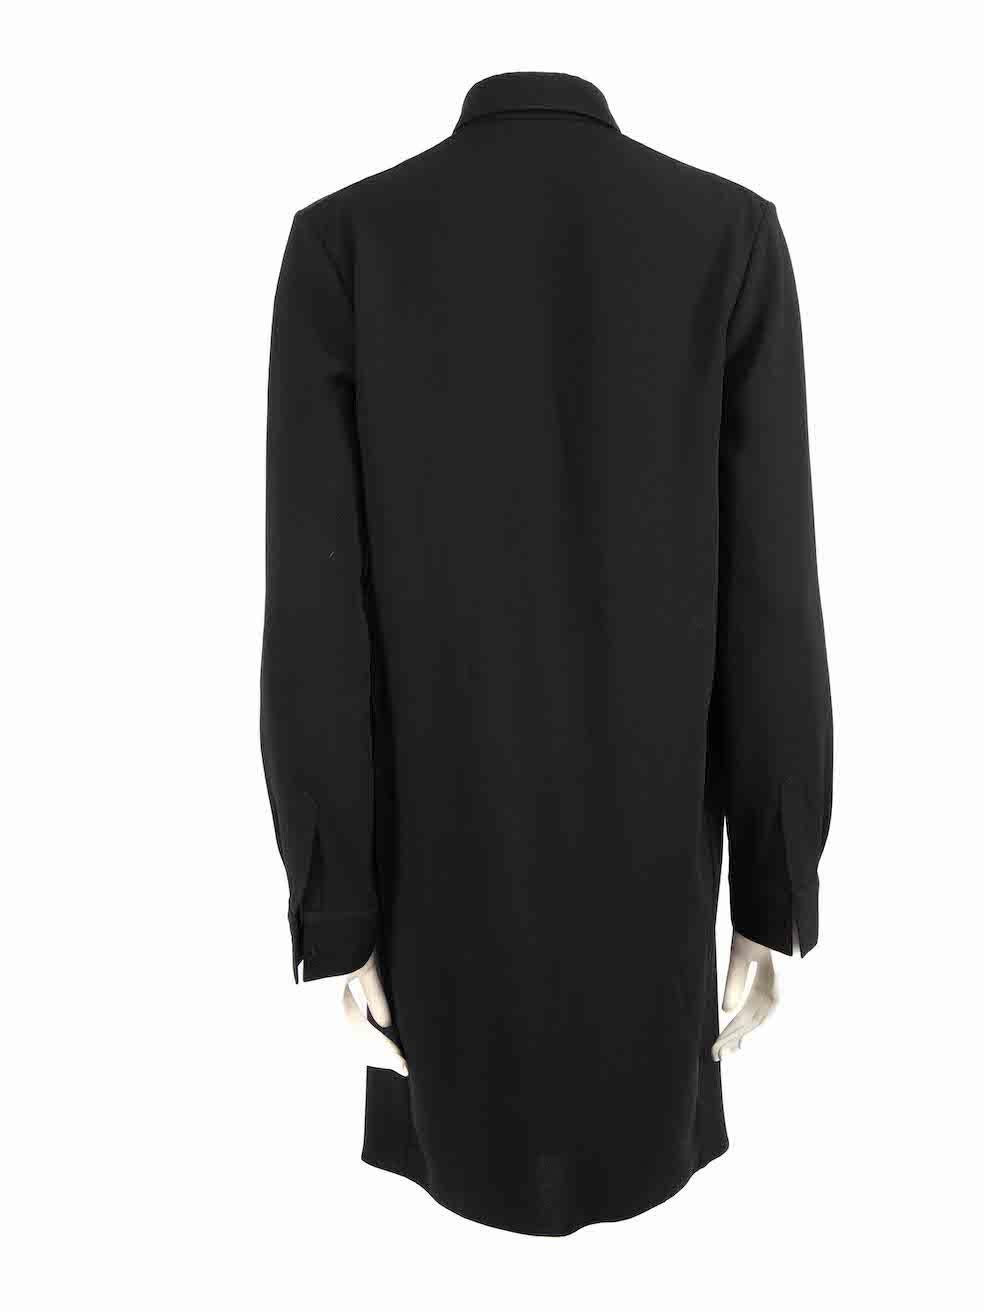 Balenciaga Black Cowl Neck Long Sleeve Dress Size S In Good Condition For Sale In London, GB